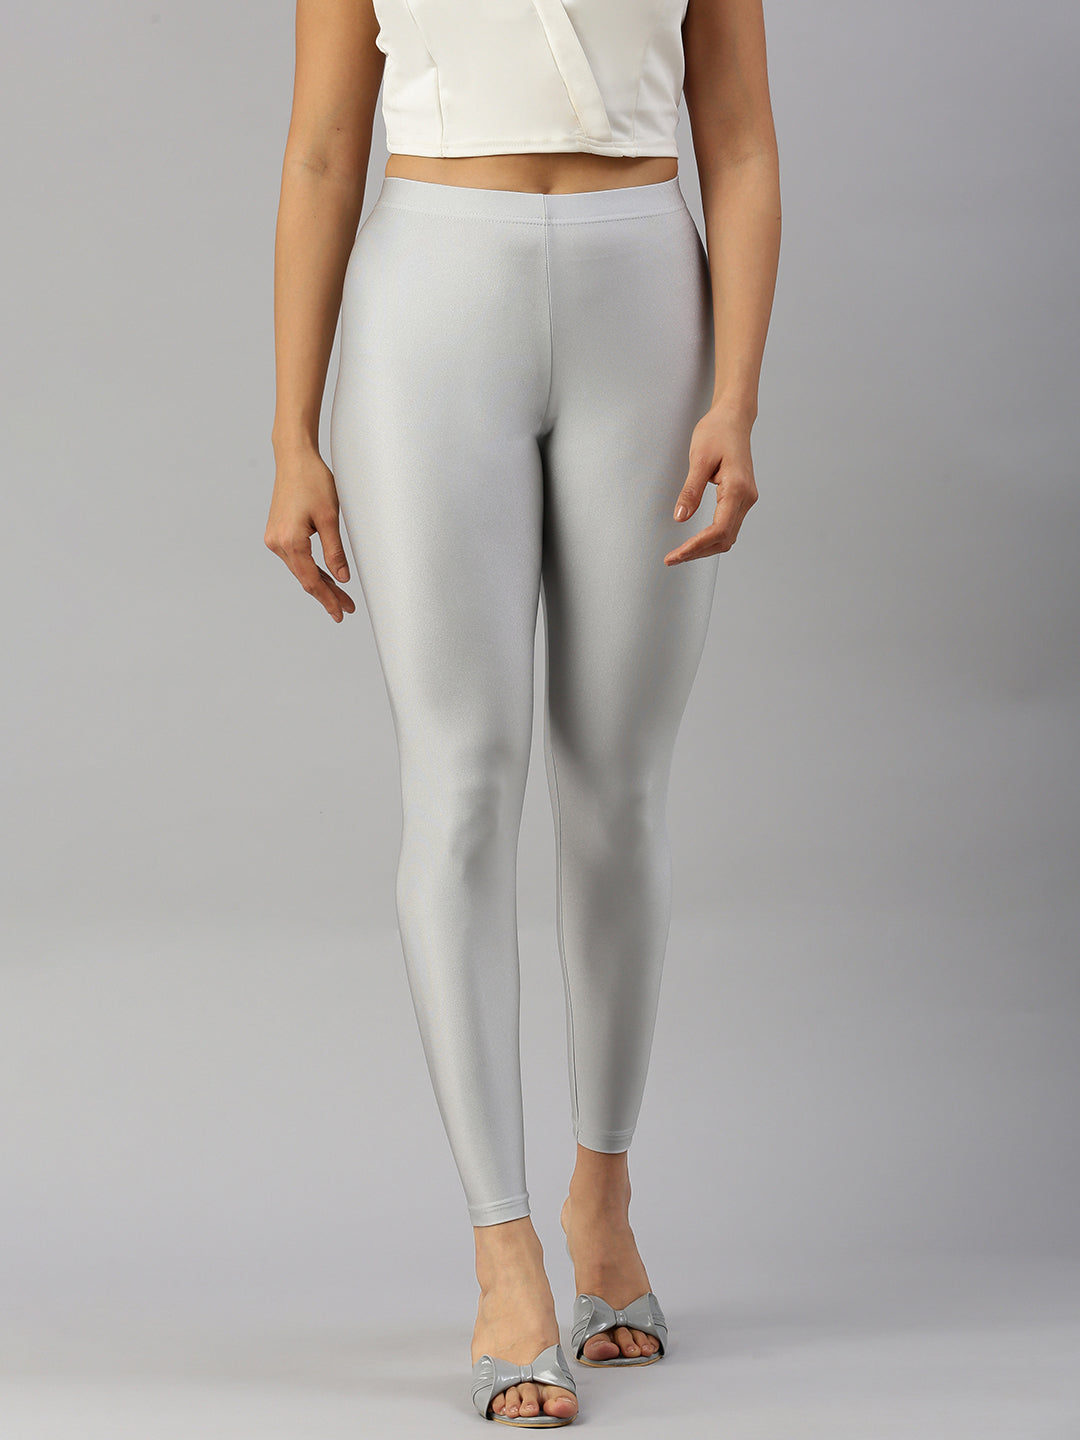 Silver High Waist Ladies Shimmer Leggings, Casual Wear, Slim Fit at Rs 100  in Indore